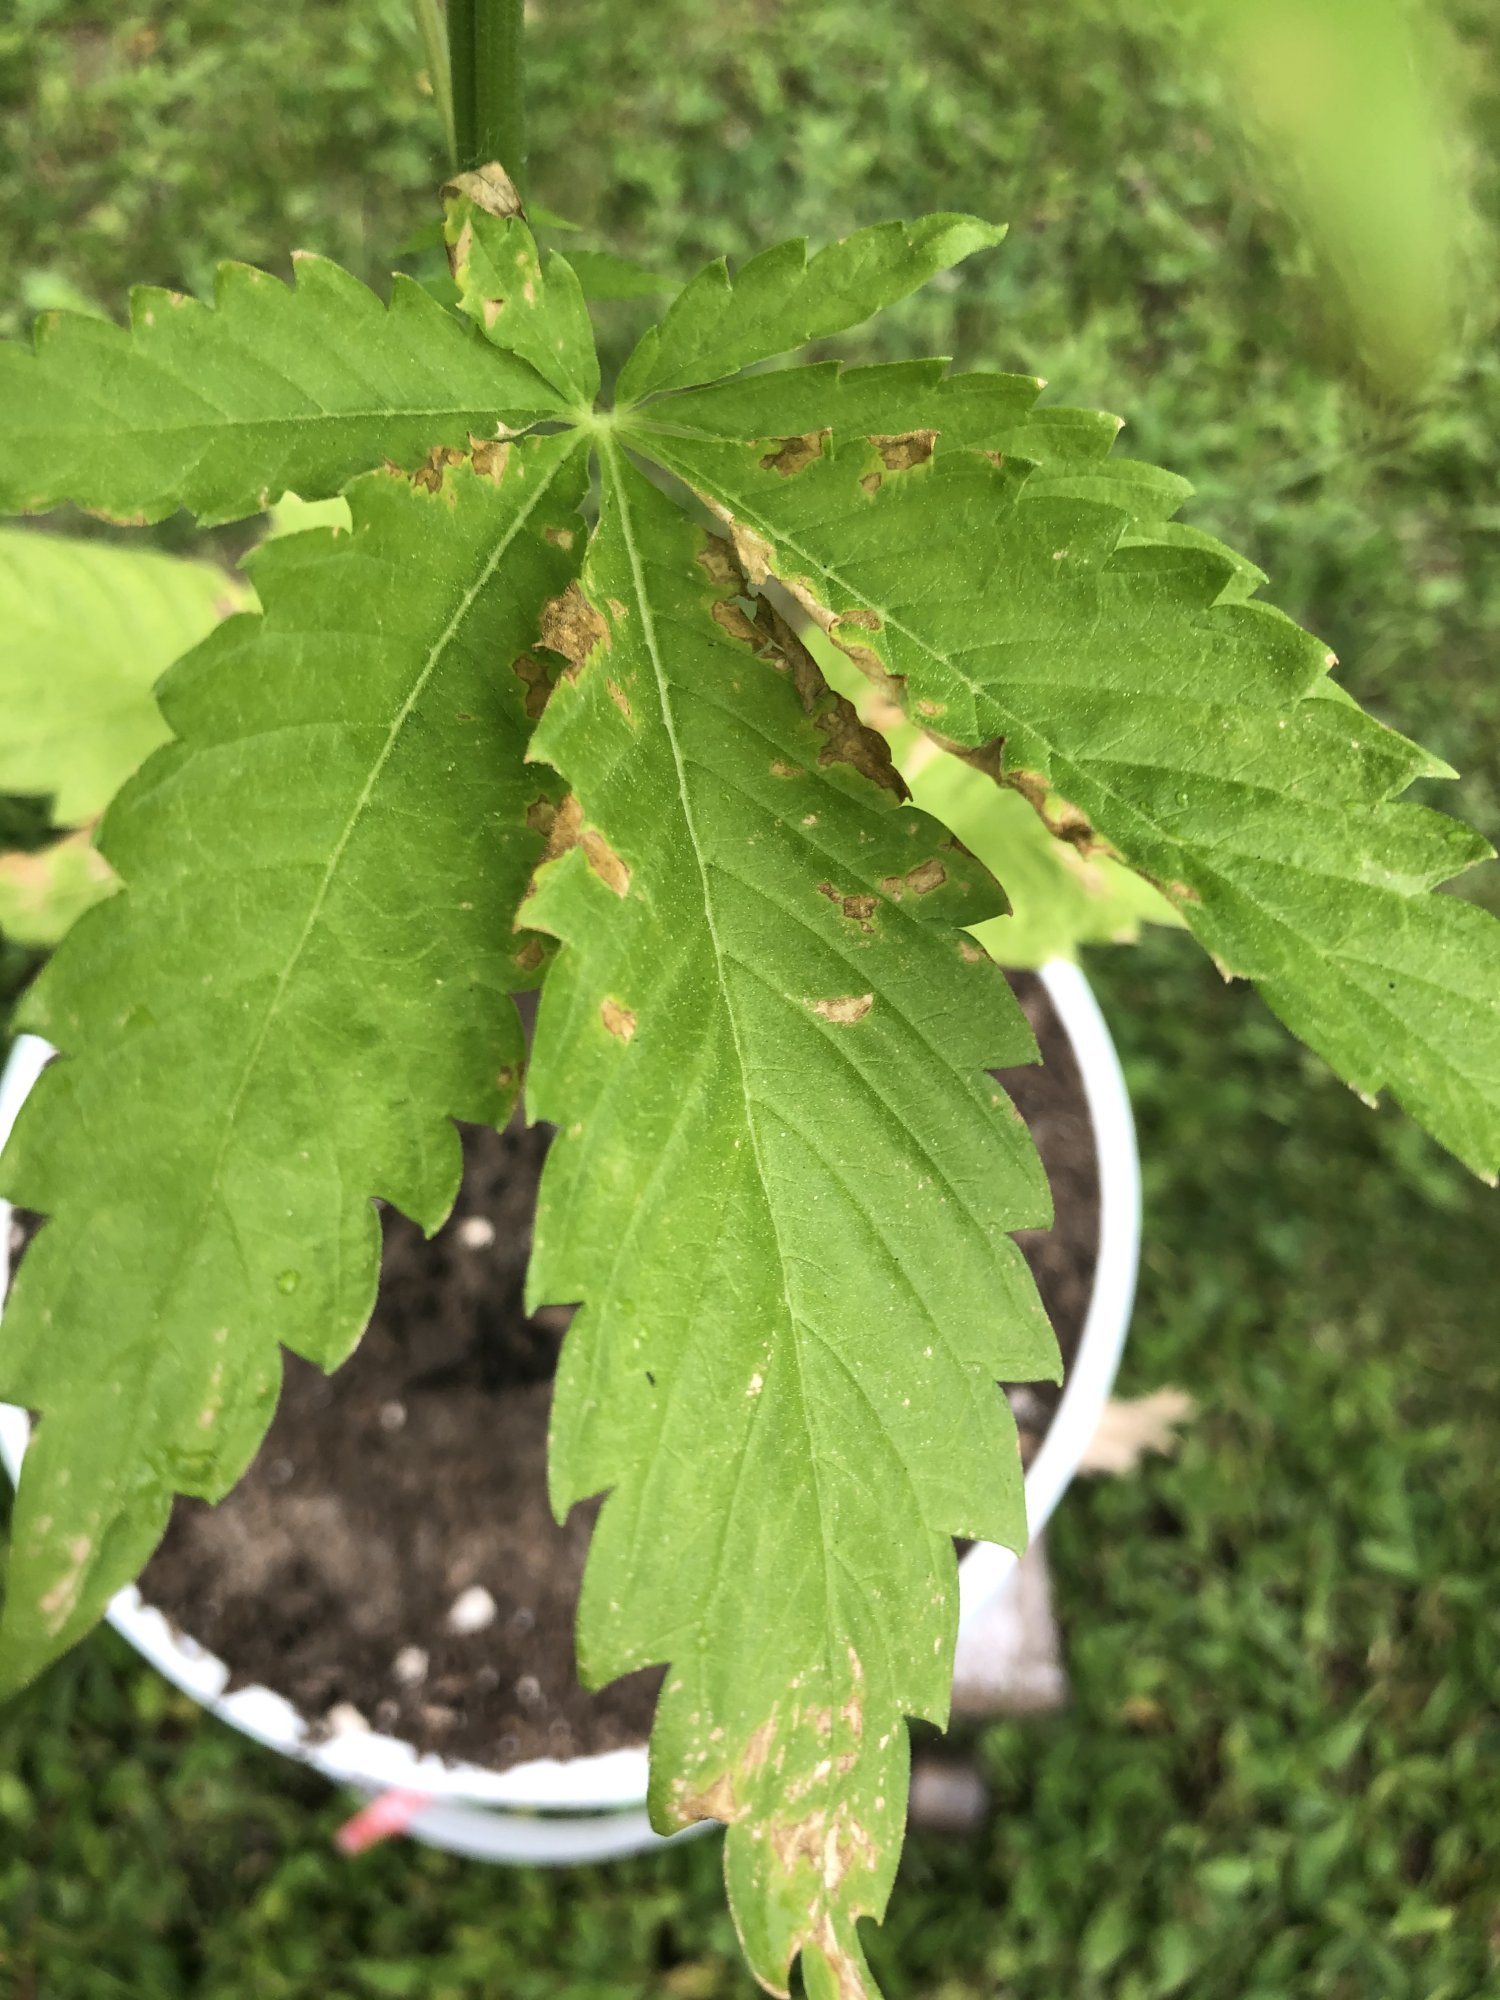 First time grower  help diagnosing please 8